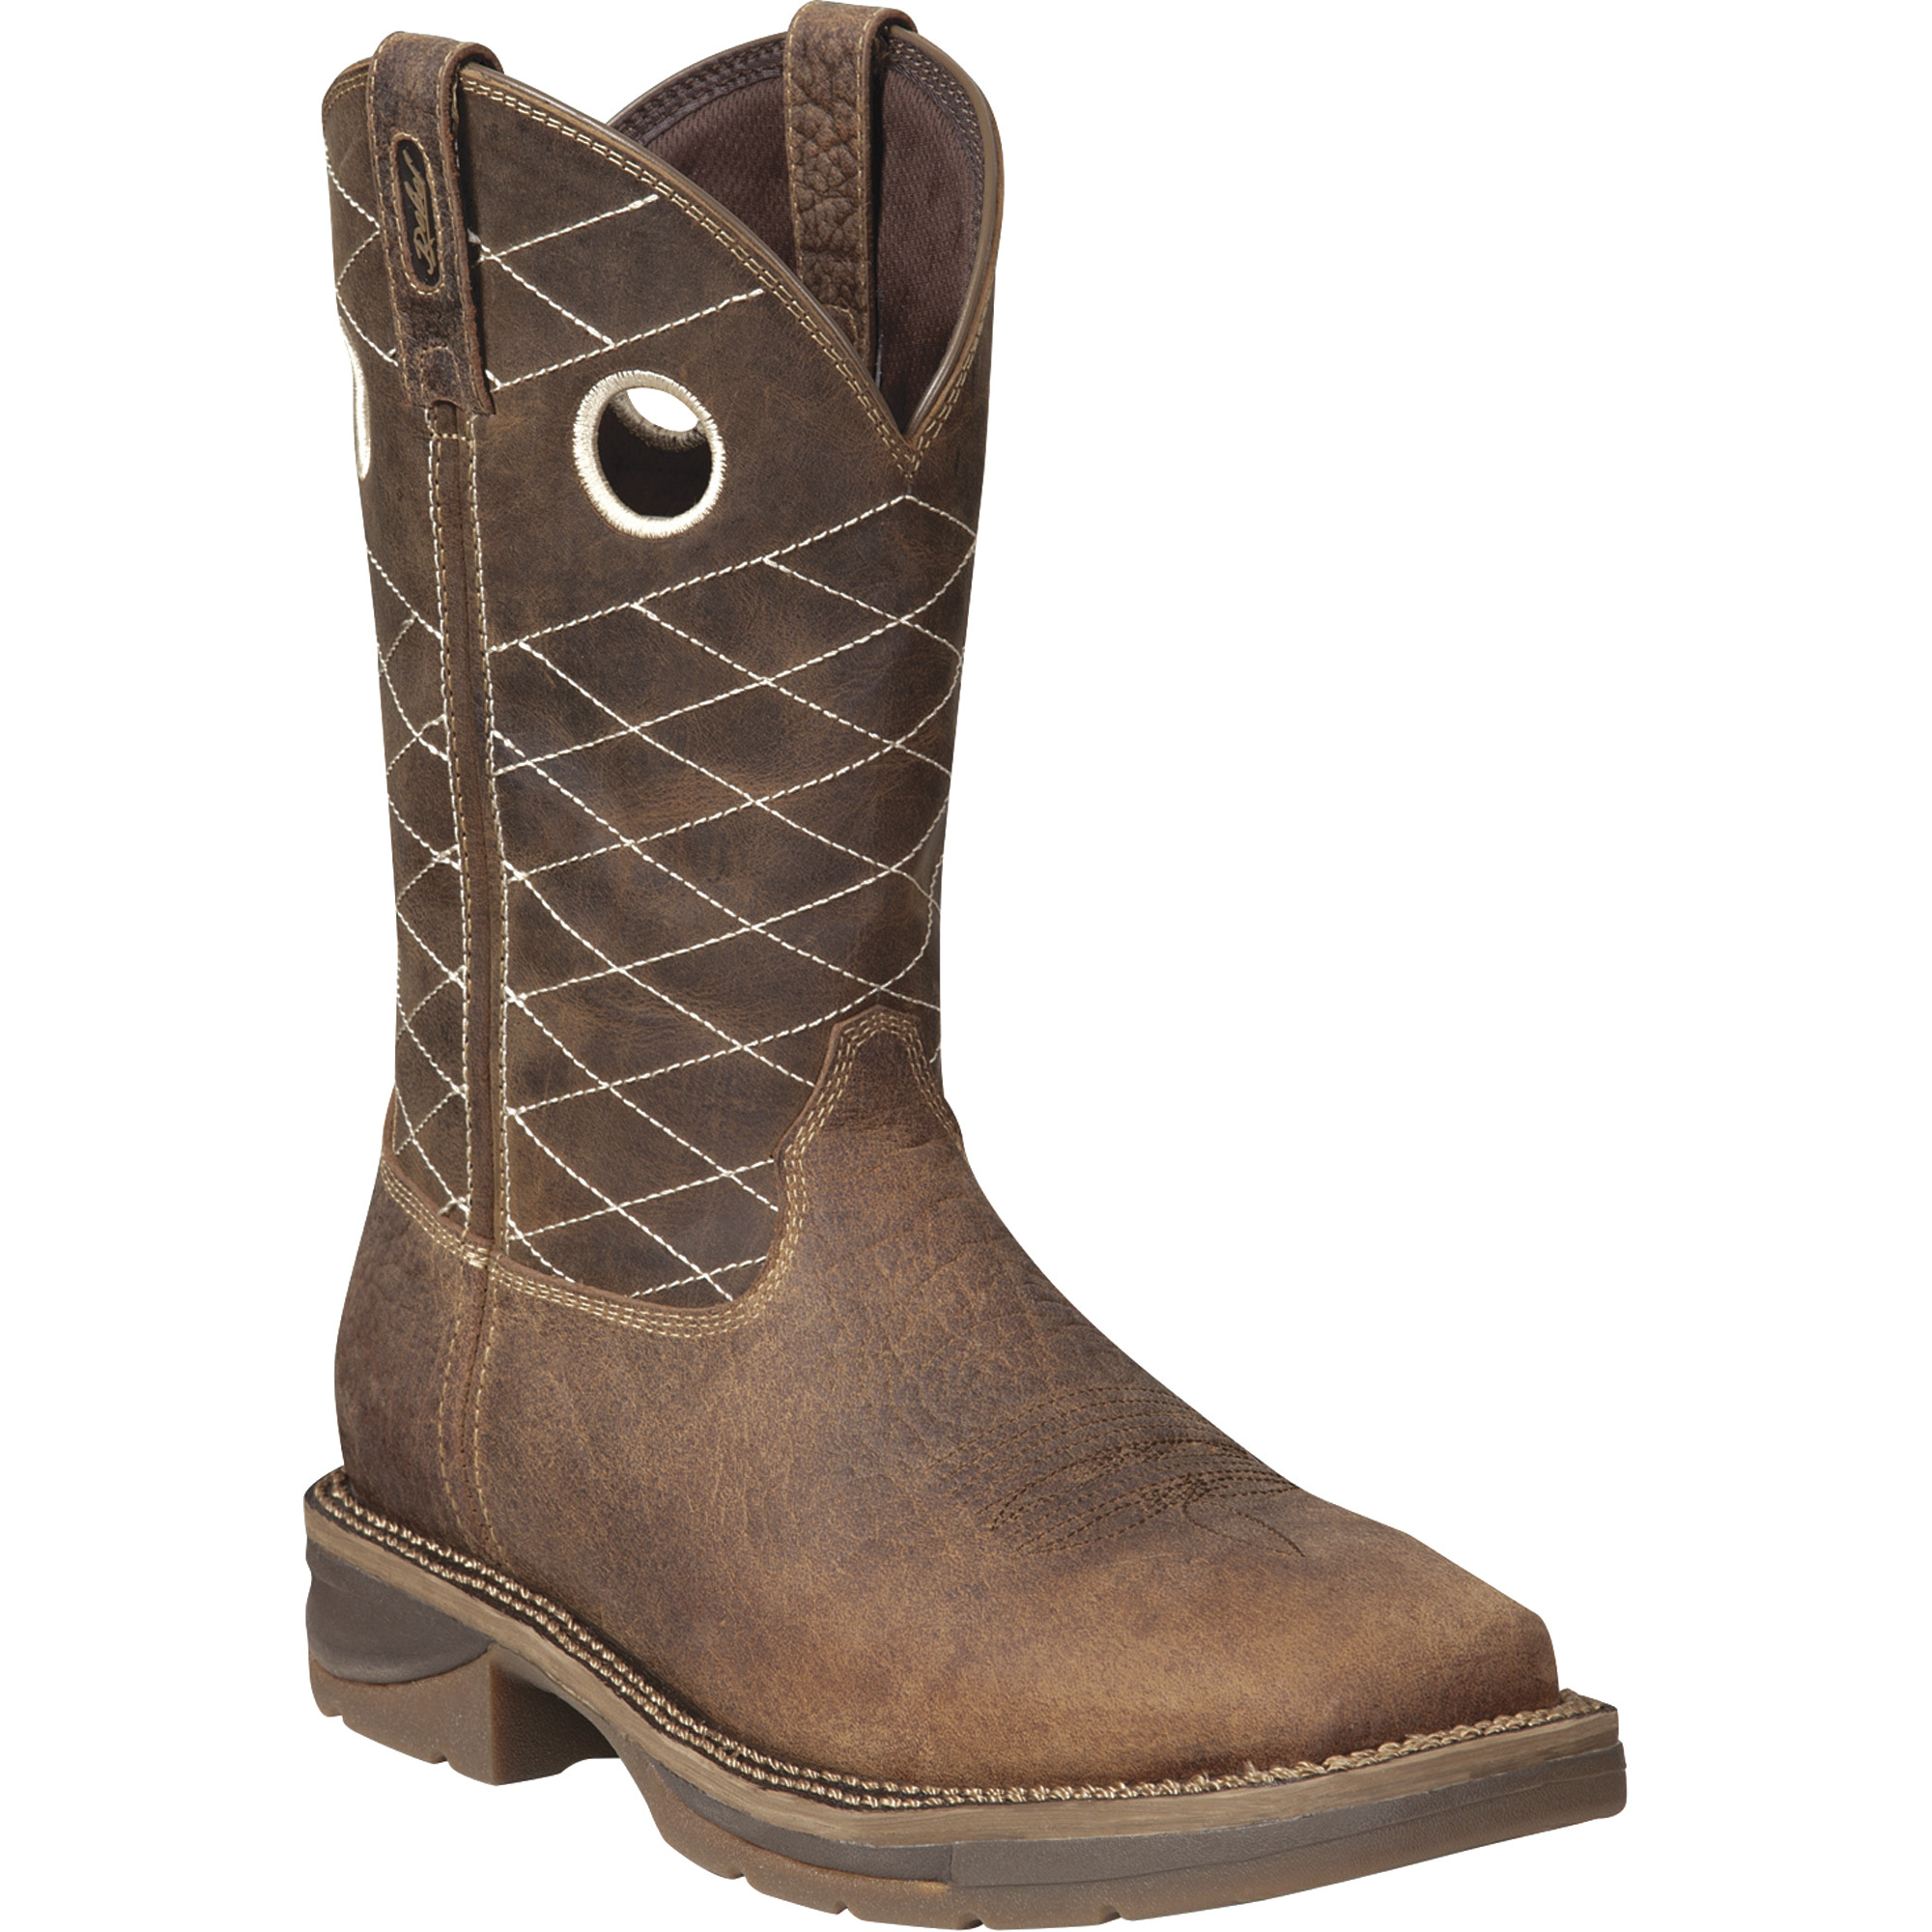 Durango Men's Workin' Rebel 11Inch Safety-Toe EH Western Pull-On Boot - Size 8, Model DB 4354